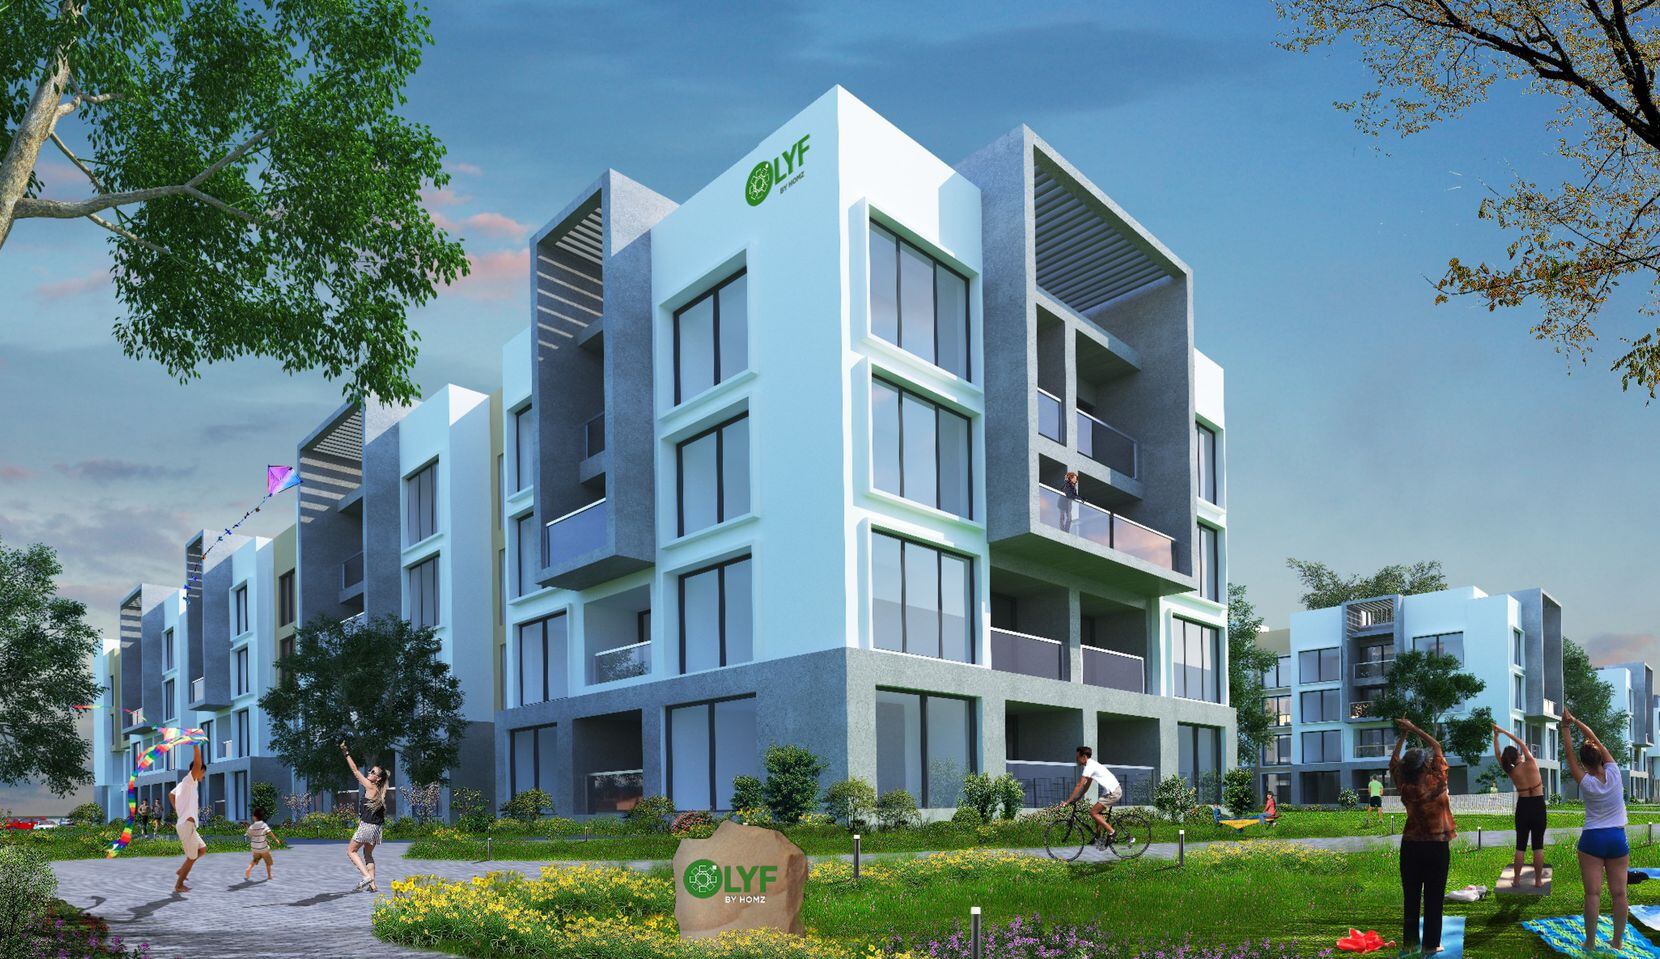 LYF is one of the four apartment complex brands that will be found at Homz communities.